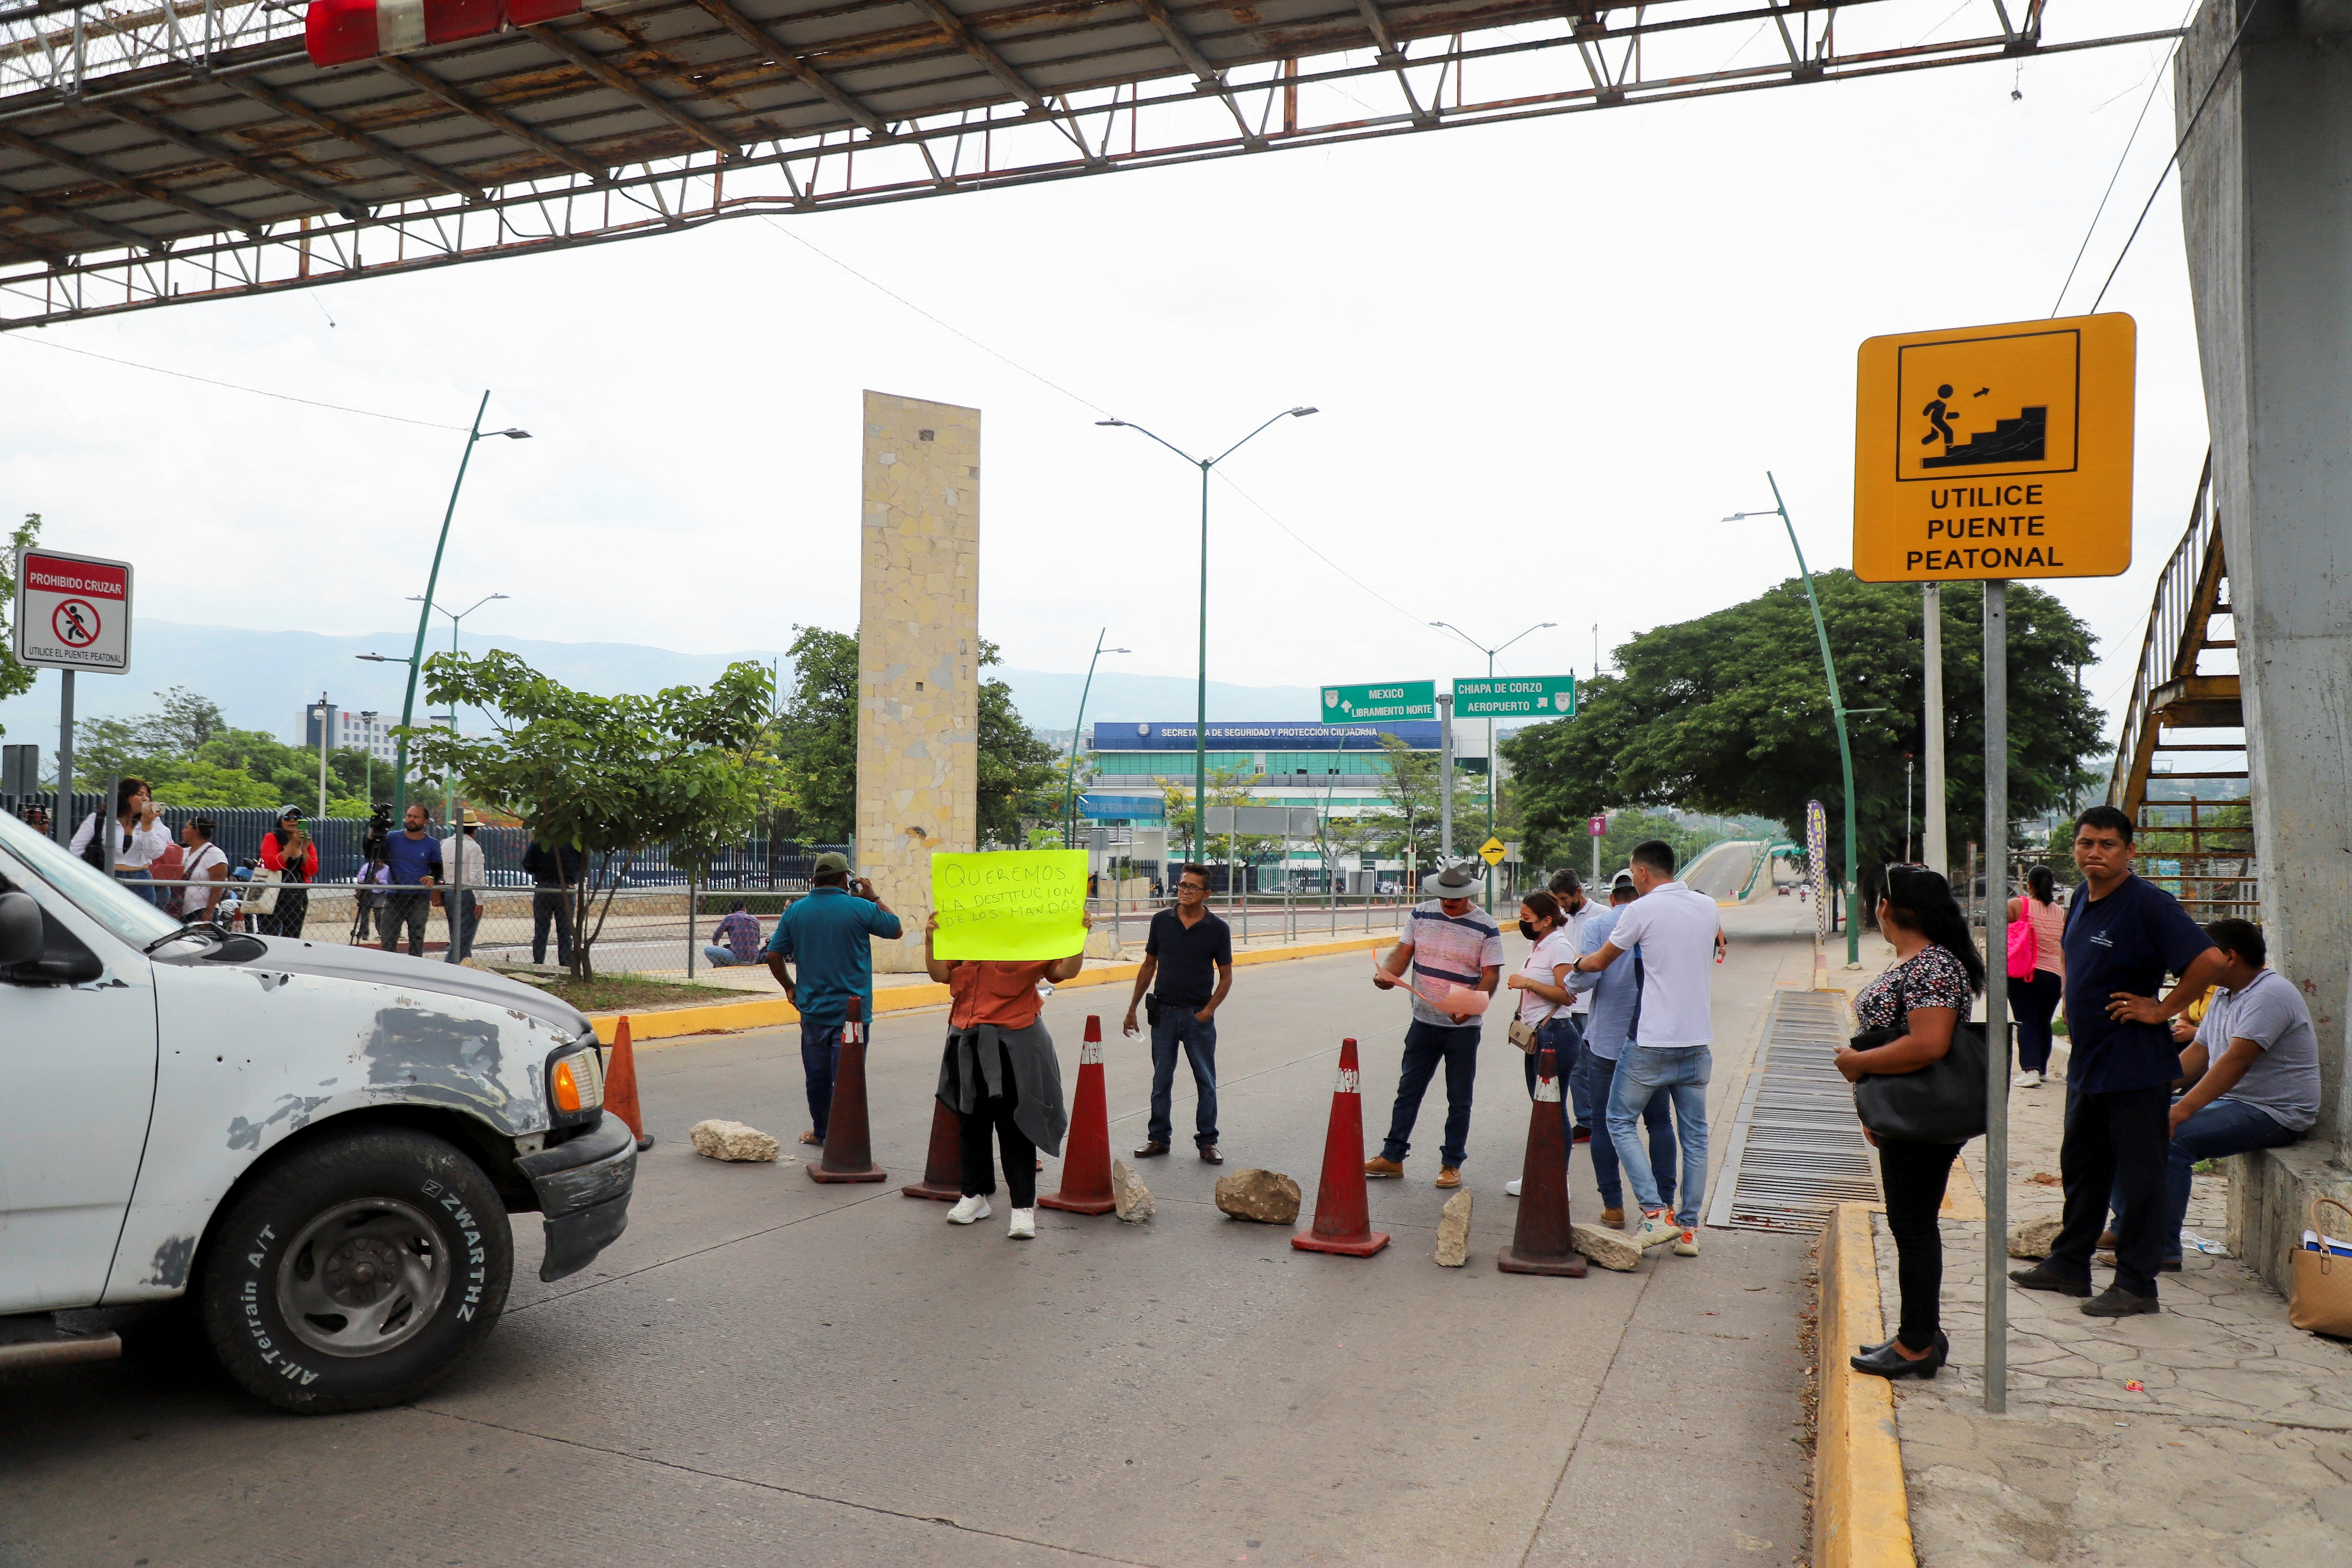 Relatives of 14 state security ministry employees who were kidnapped by members of an armed group protest in Chiapas